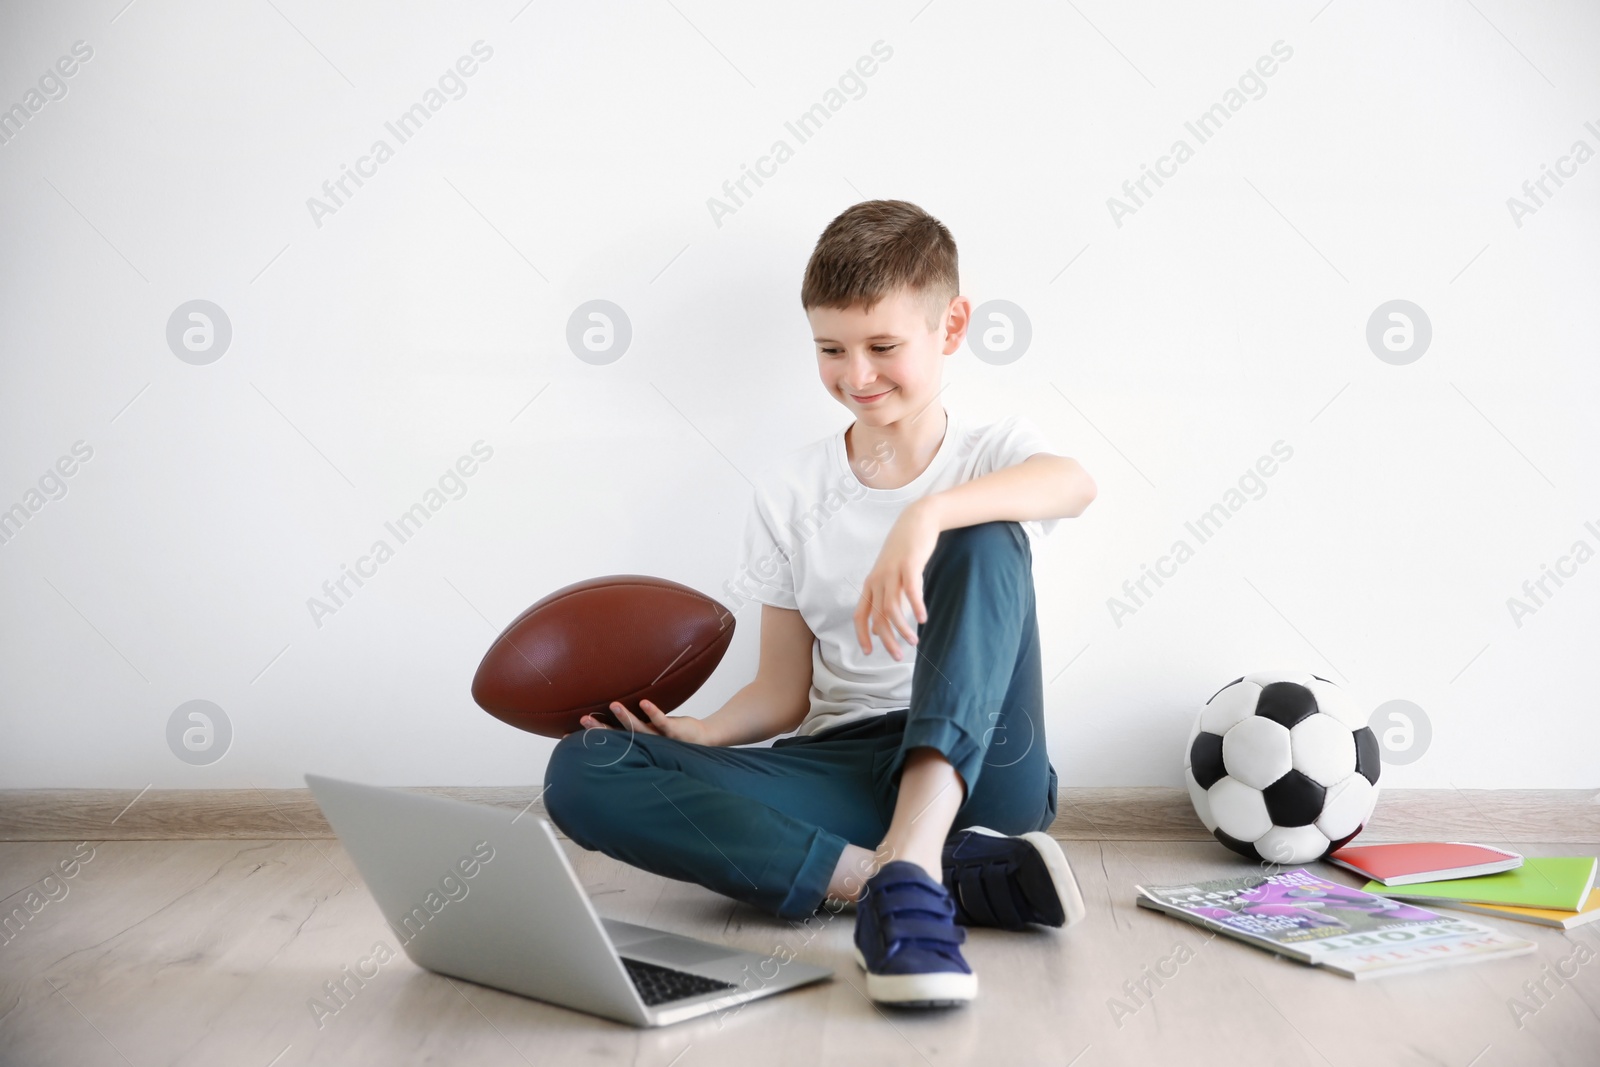 Photo of Cute little blogger with laptop and ball sitting on floor against light wall